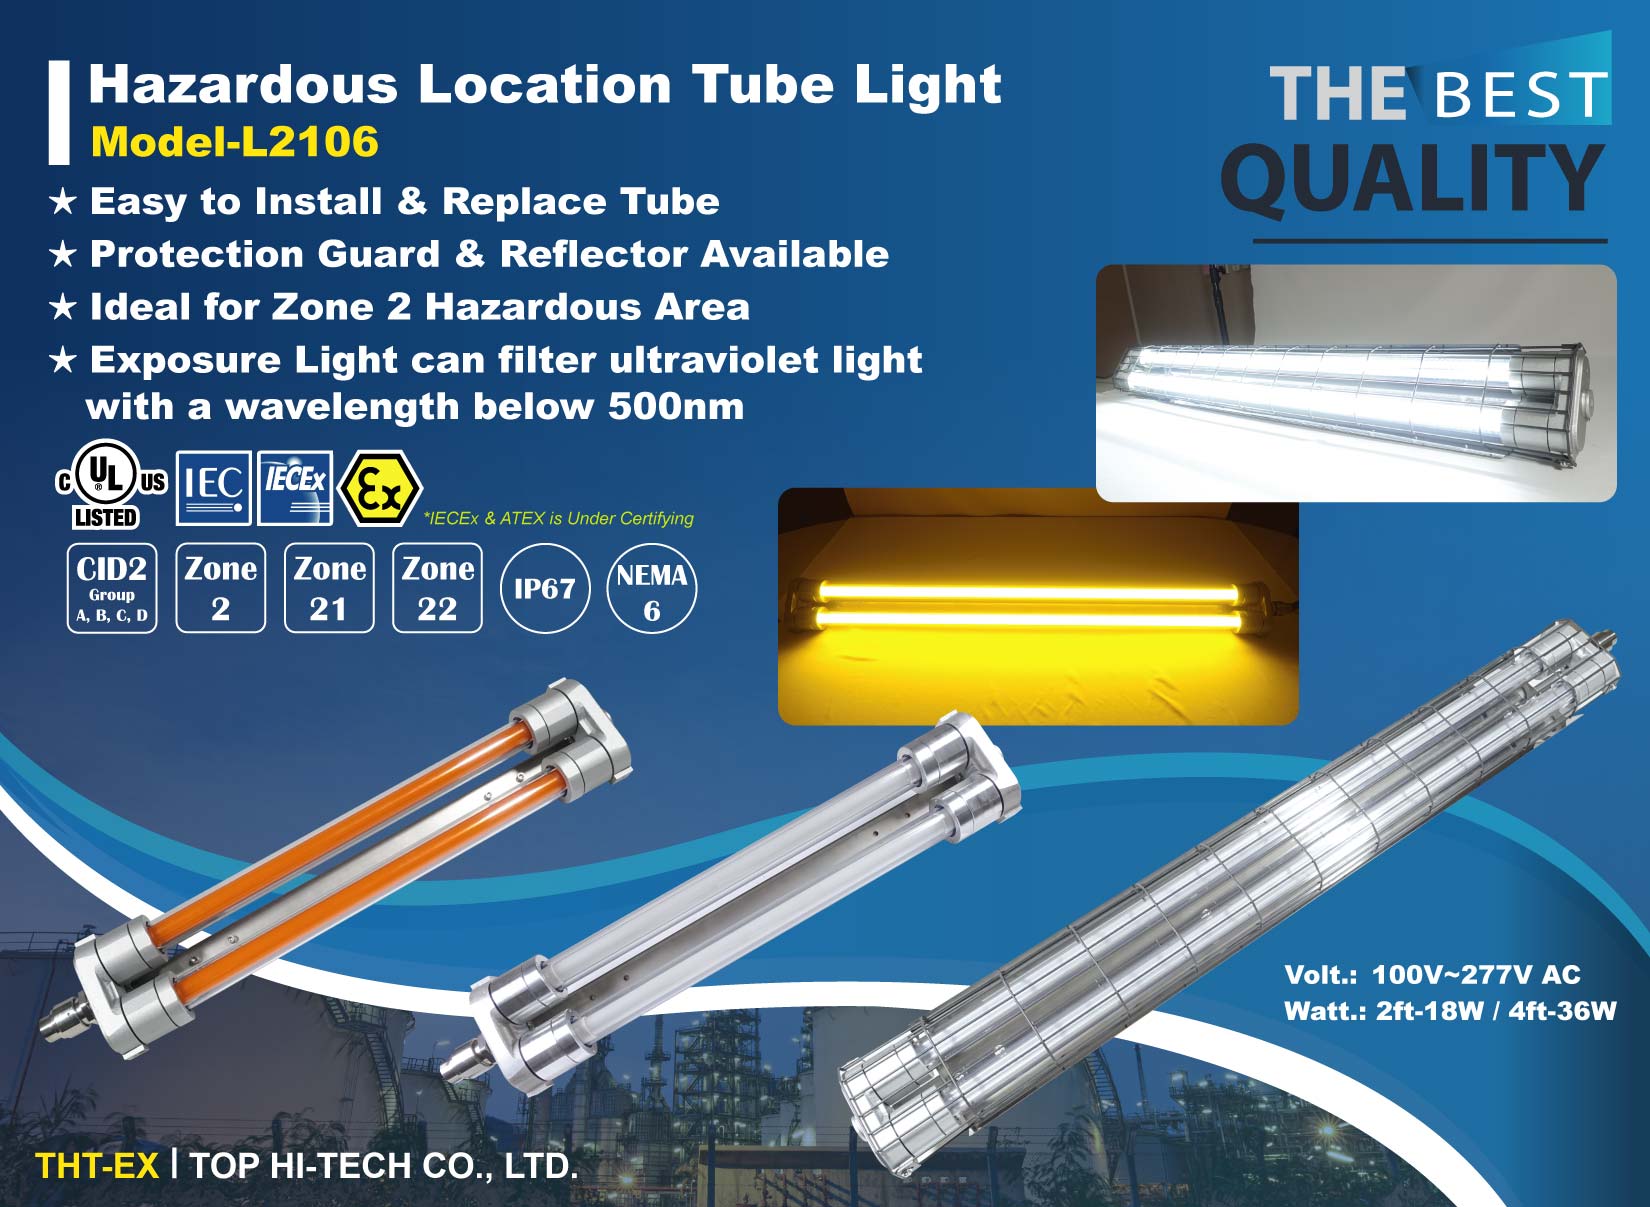 Hazardous Location Tube Light - Model L2106, With the Design of Replaceable Tube!